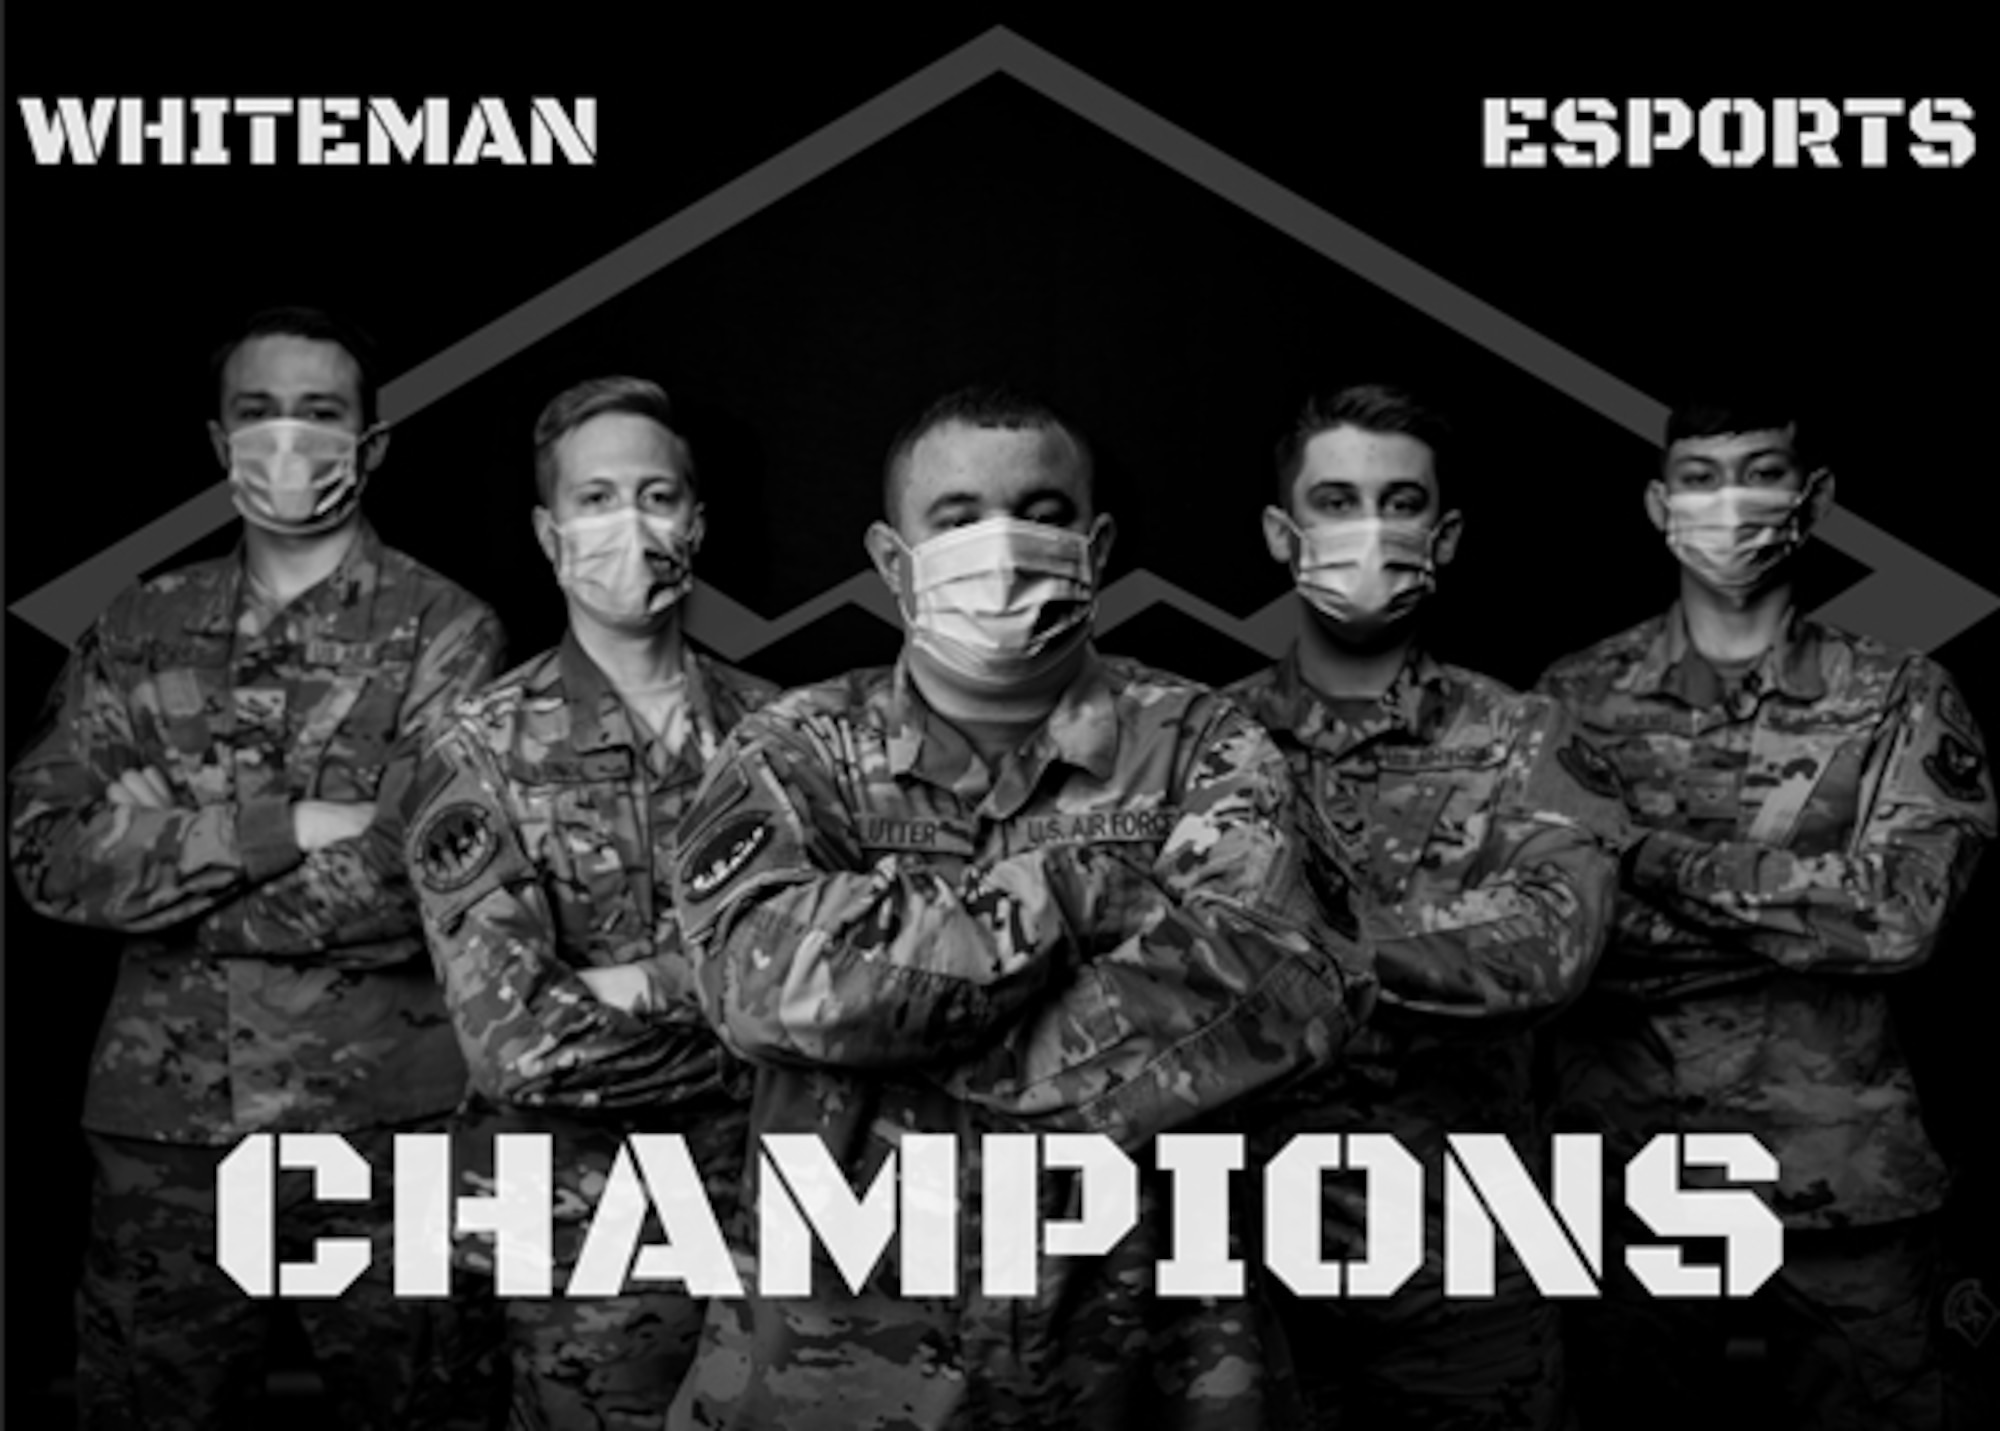 Members of Whiteman’s esports team stands for group photo at Whiteman Air Force Base, Missouri, July 30, 2020. Whiteman placed first in the Air Force esport’s inter-base championship on July 25, 2020. (U.S. Air Force photo illustration by Airman 1st Class Christina Carter)